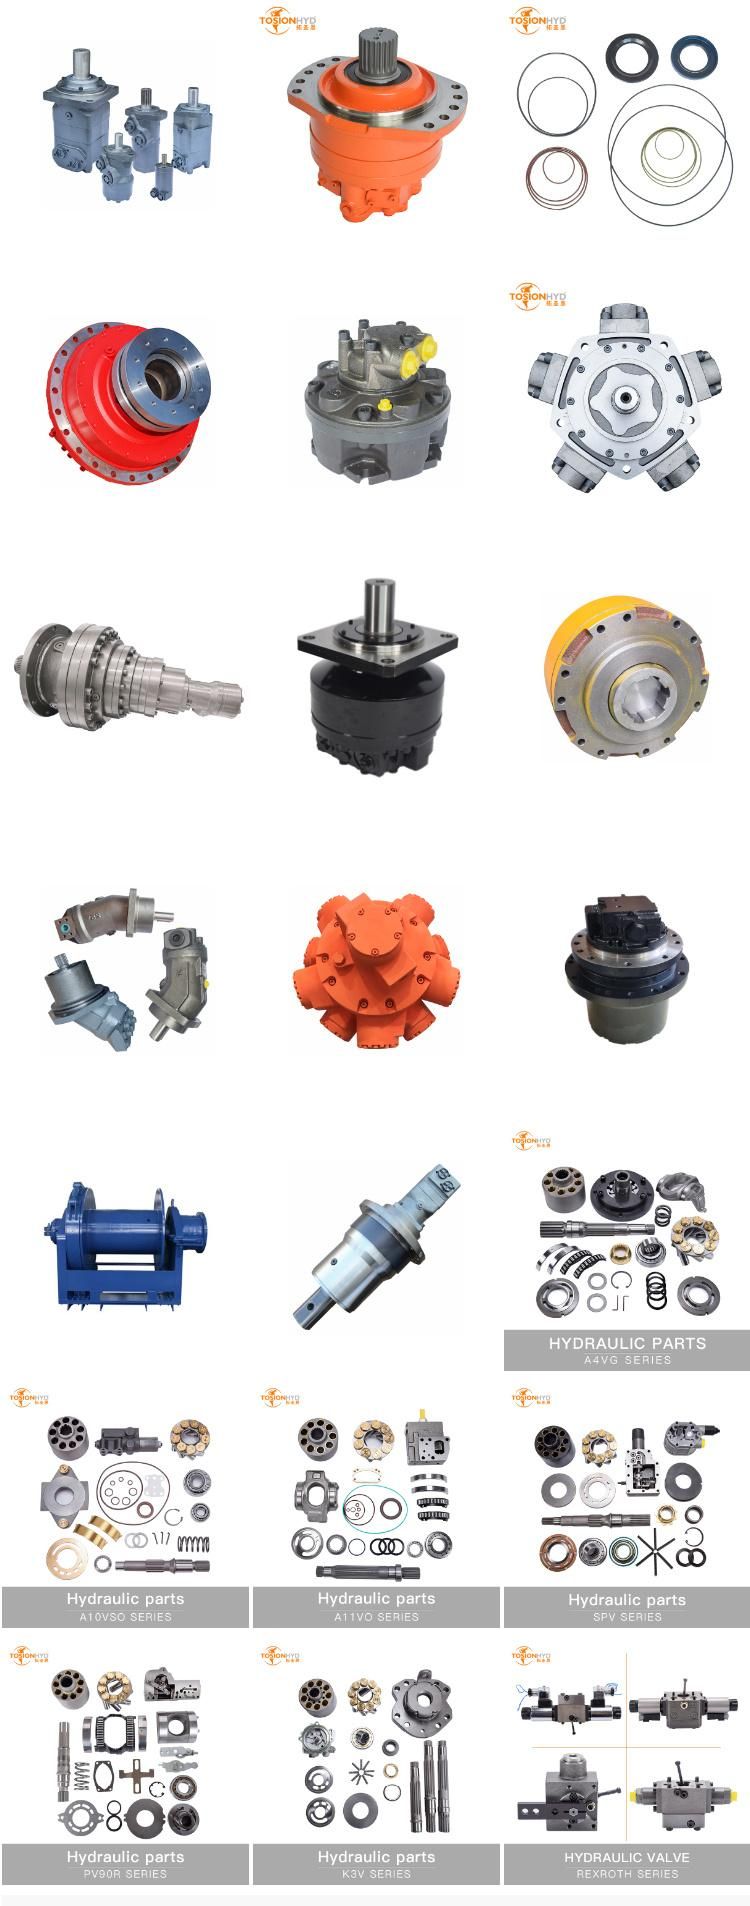 A2fe 80 Hydraulic Motor Parts with Rexroth Spare Repair Kits